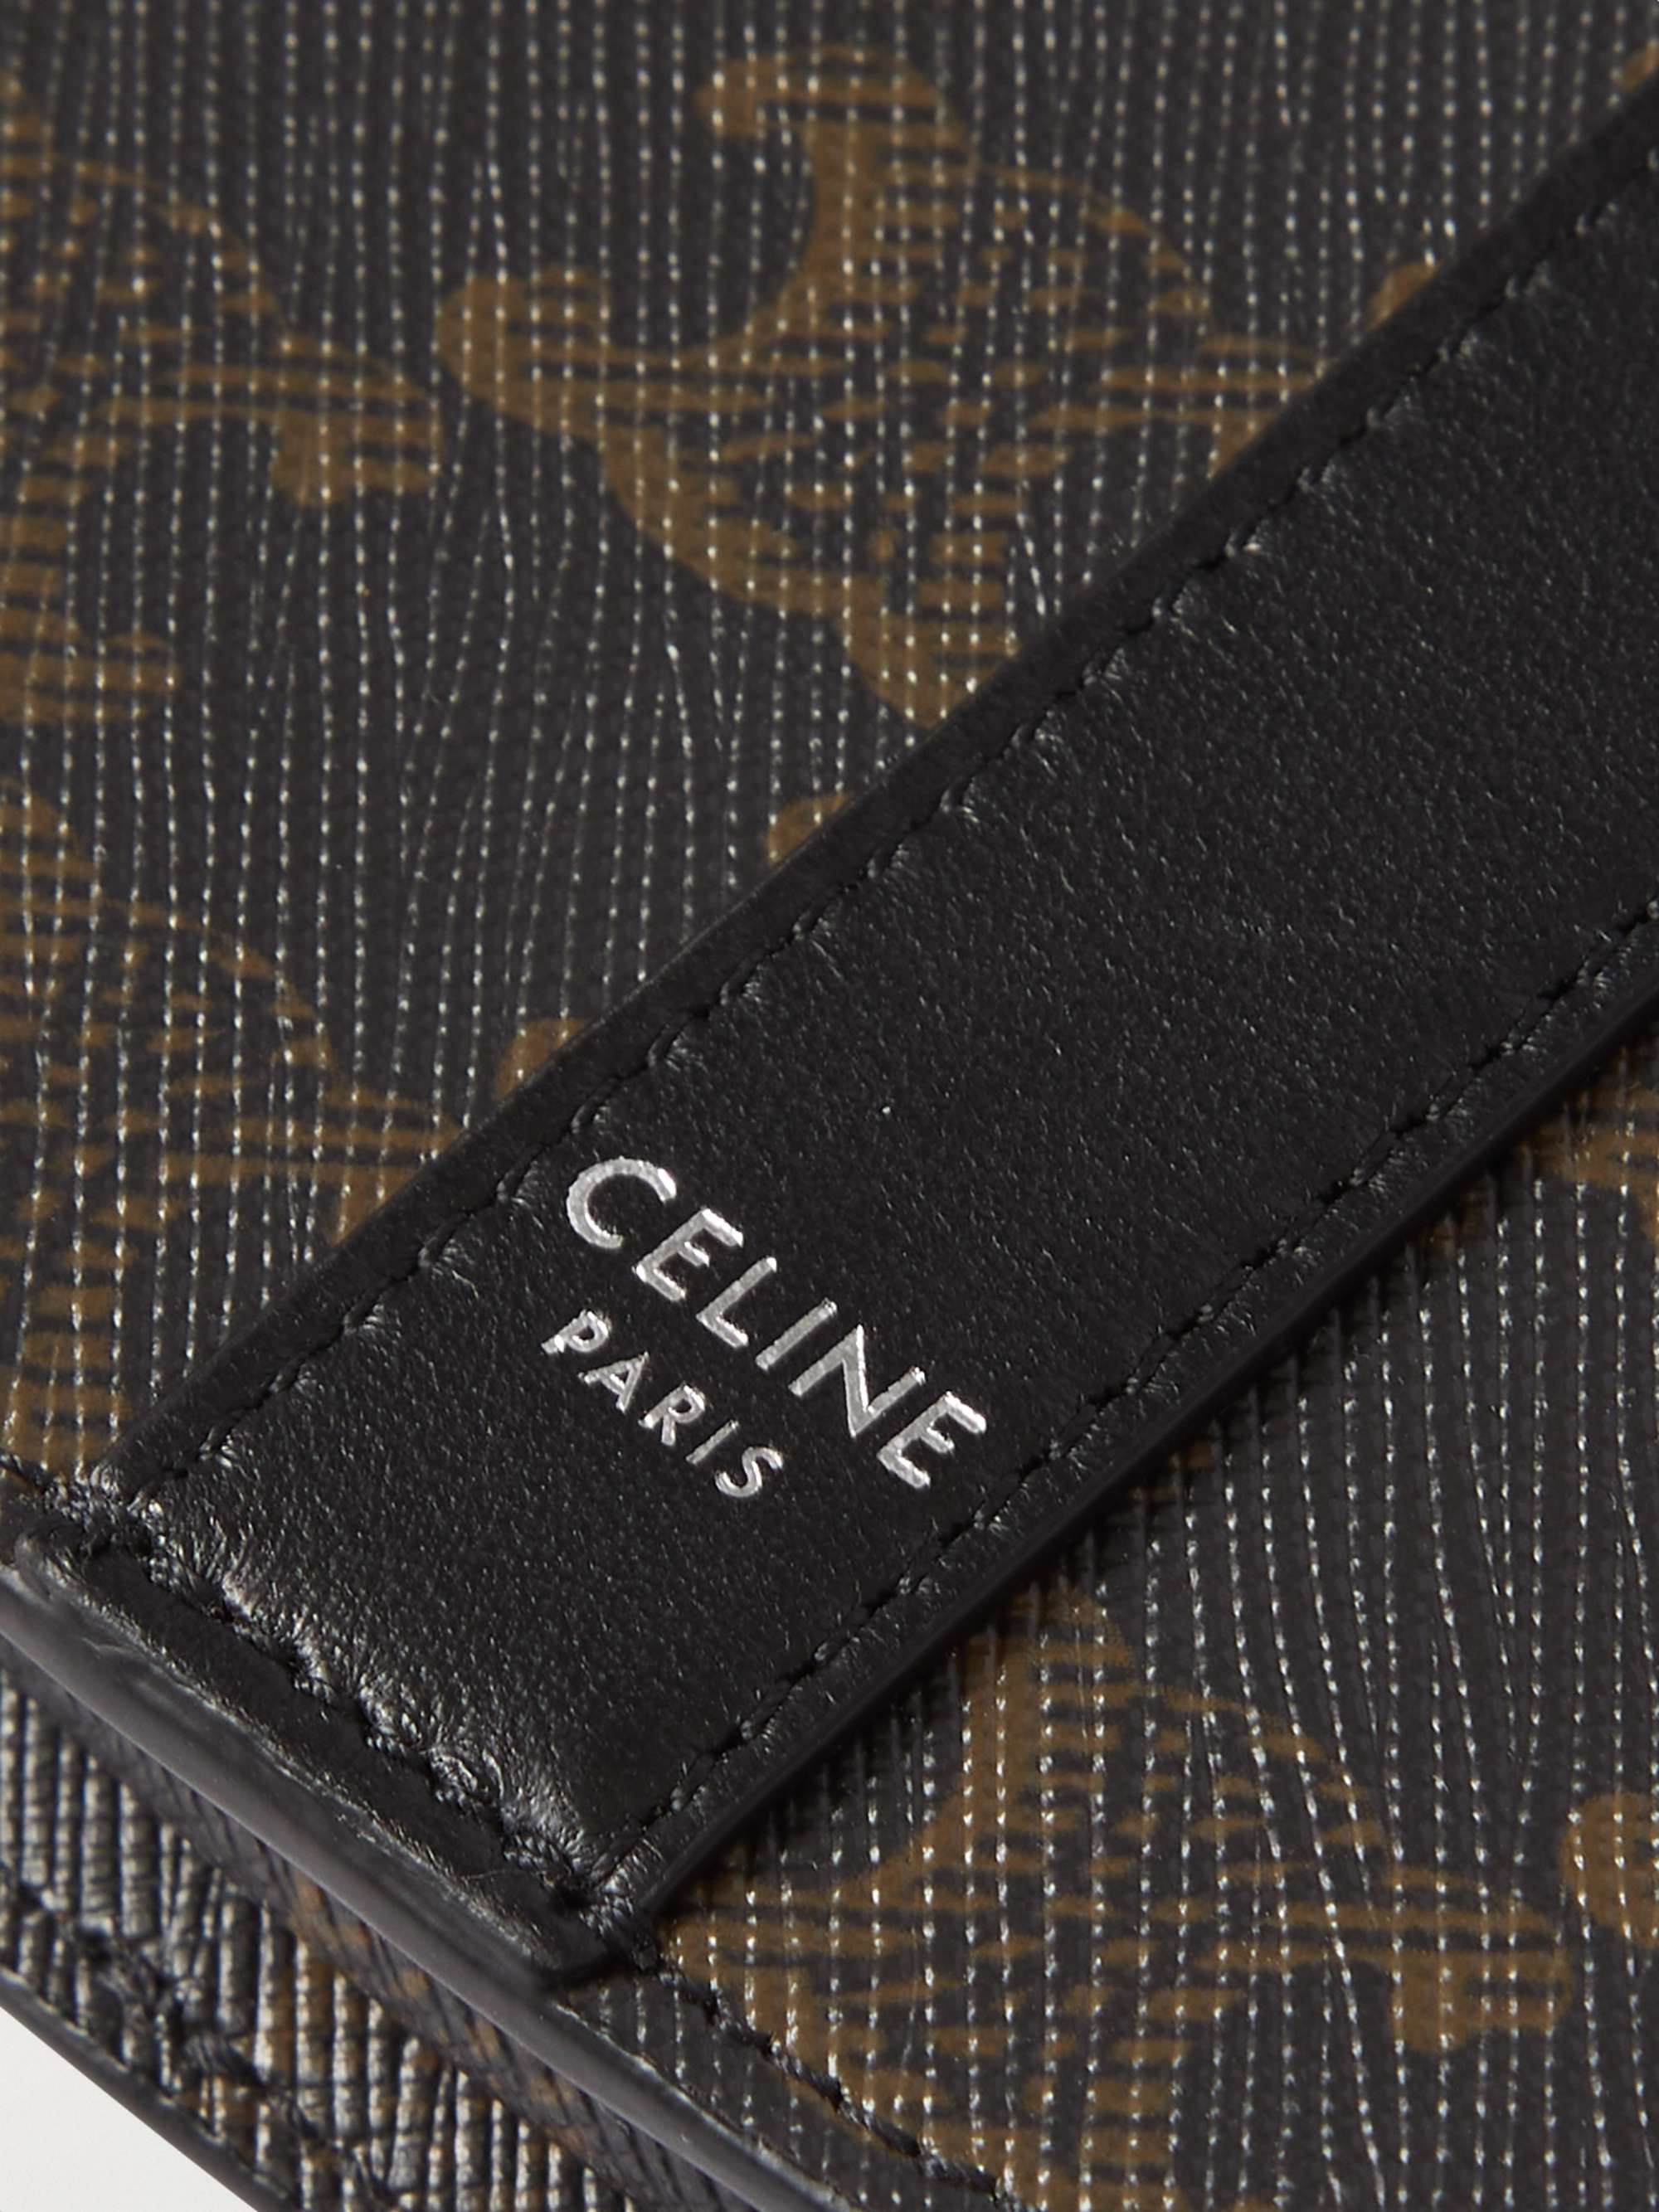 CELINE HOMME Triomphe Leather-Trimmed Logo-Print Coated-Canvas Phone Pouch  | MR PORTER